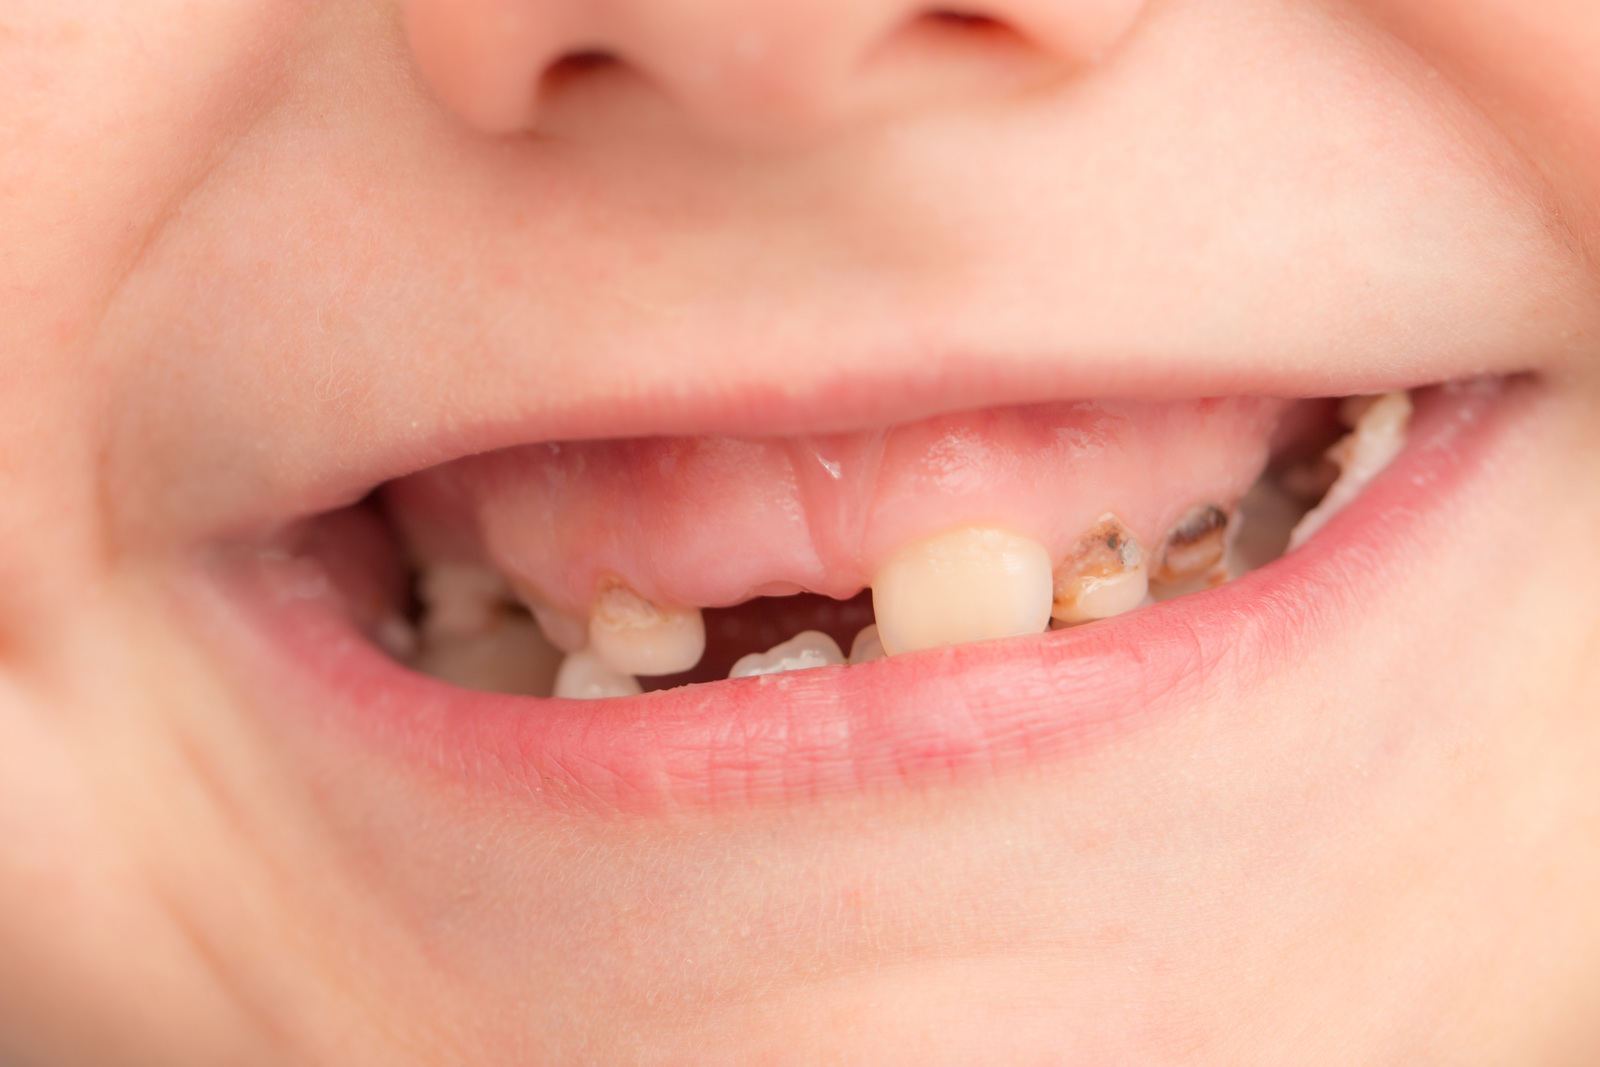 Child tooth decay crisis discussed by MPs and Ministers ...